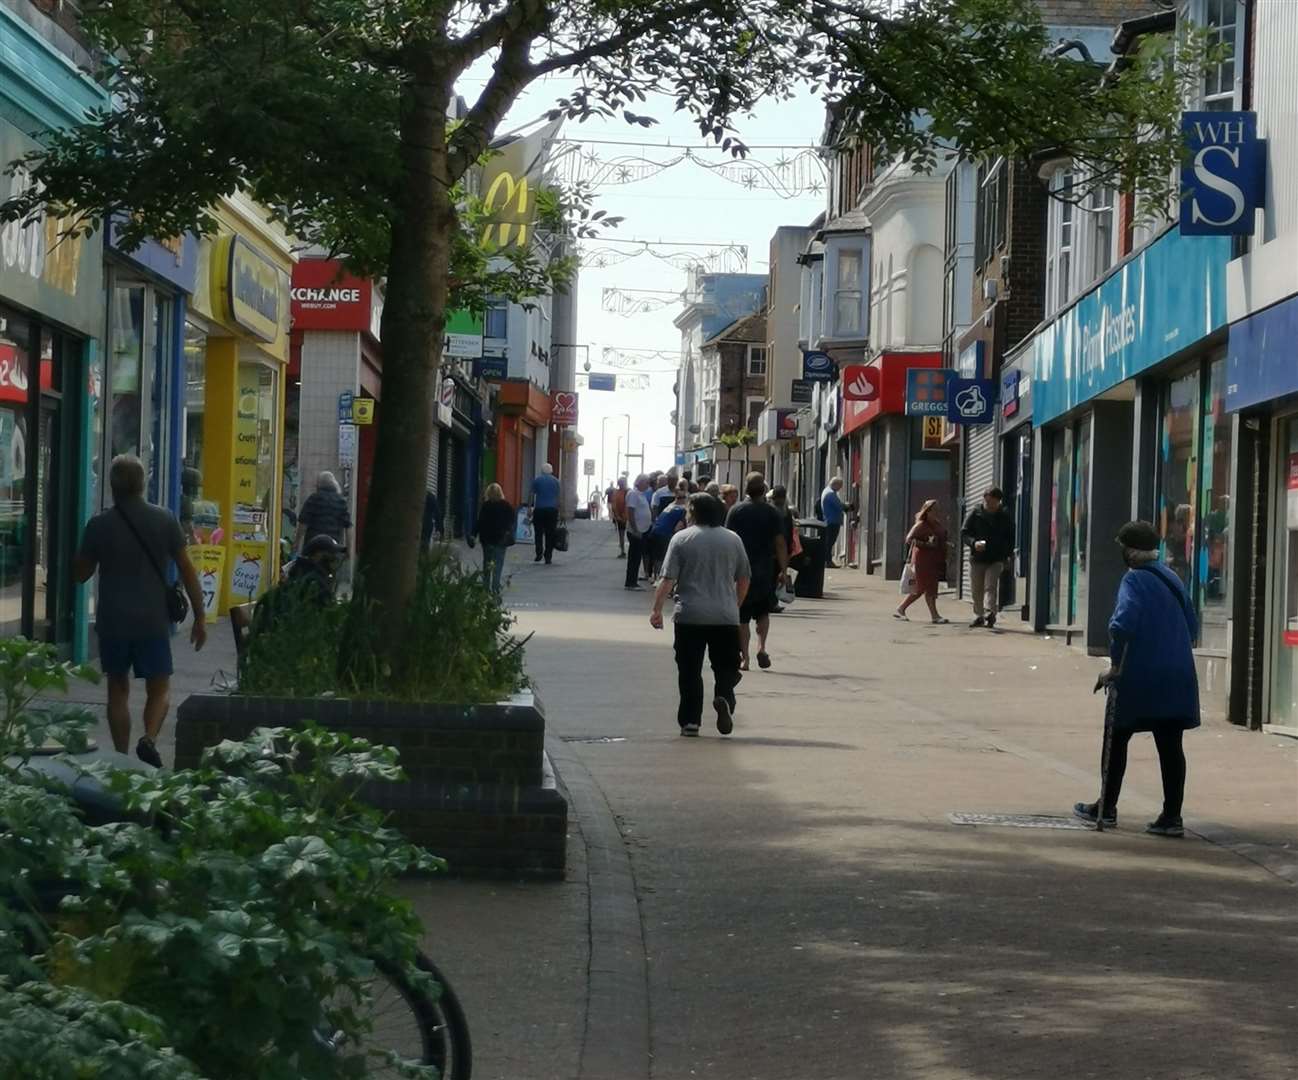 A home in Margate High Street was targeted